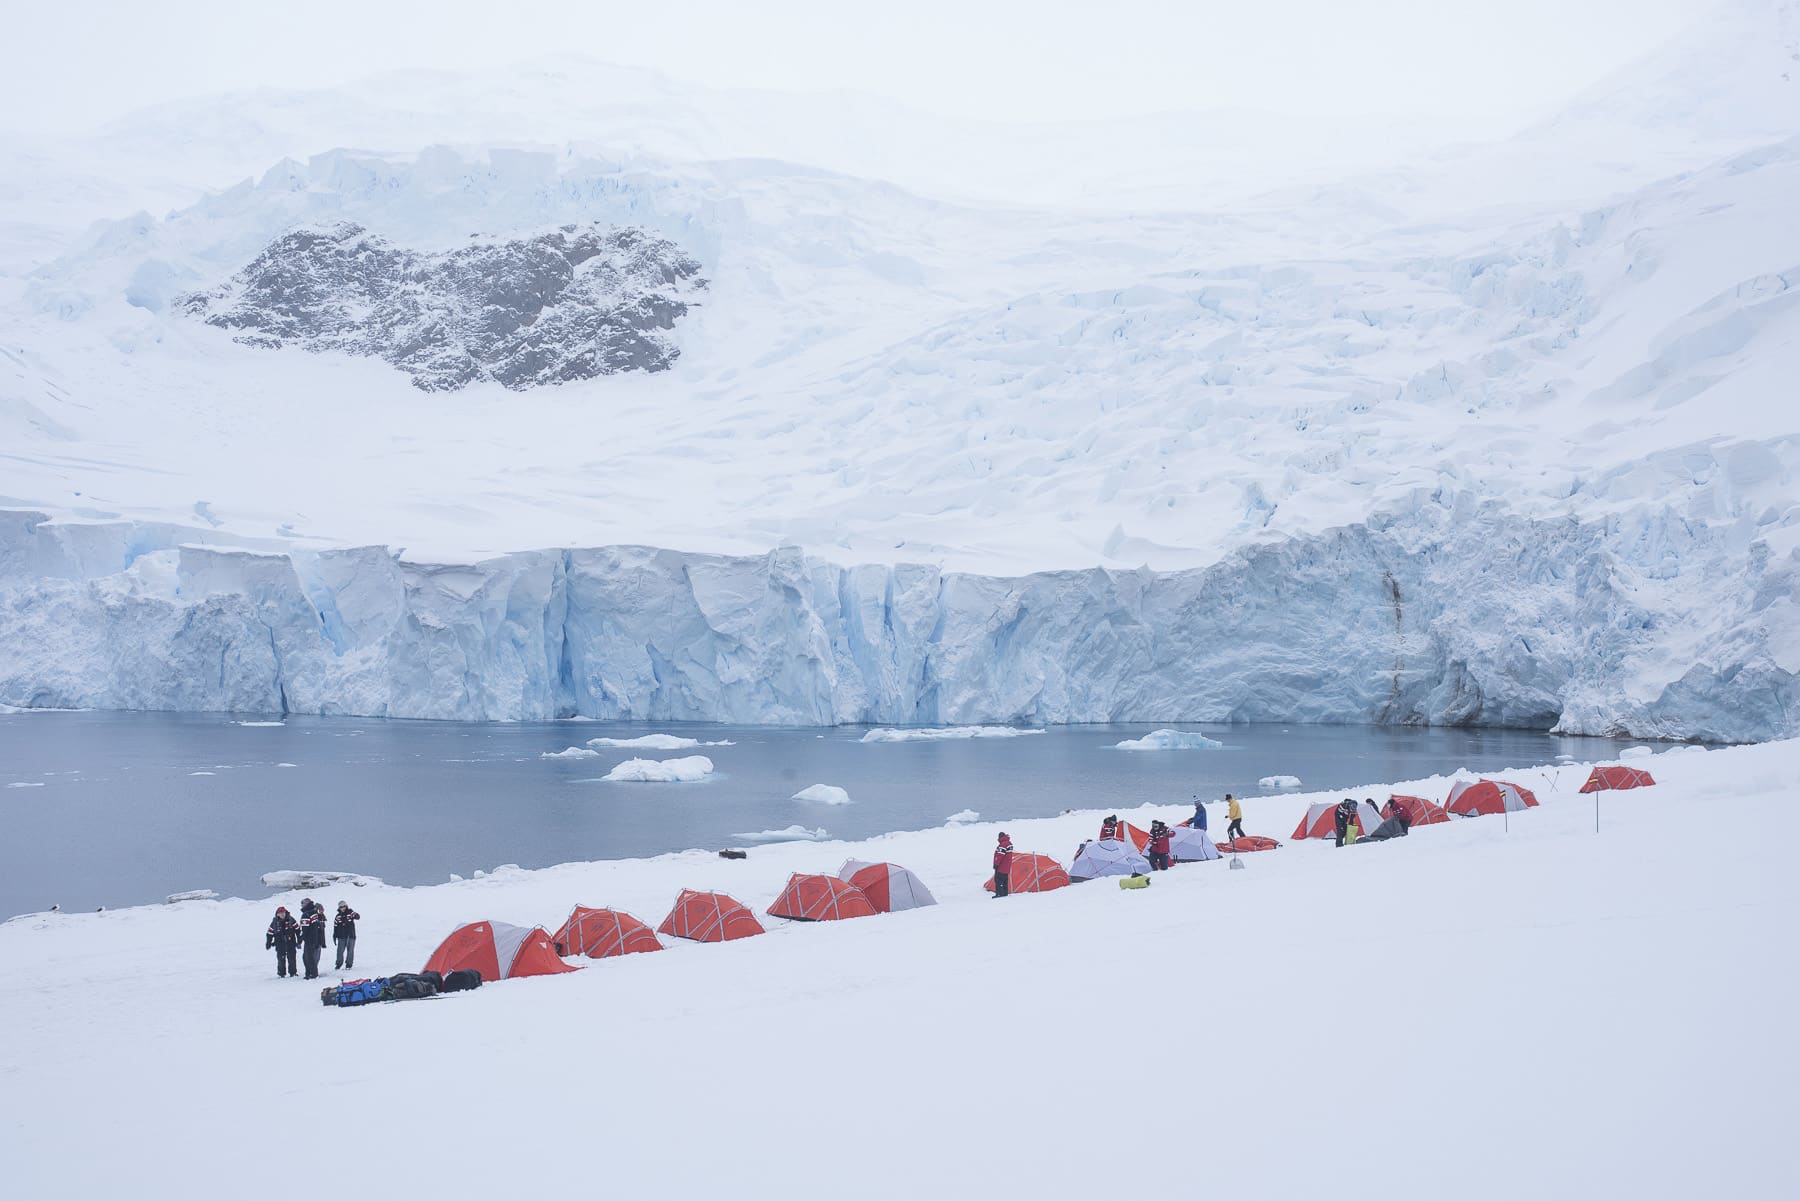 Camping tents on Antarctica